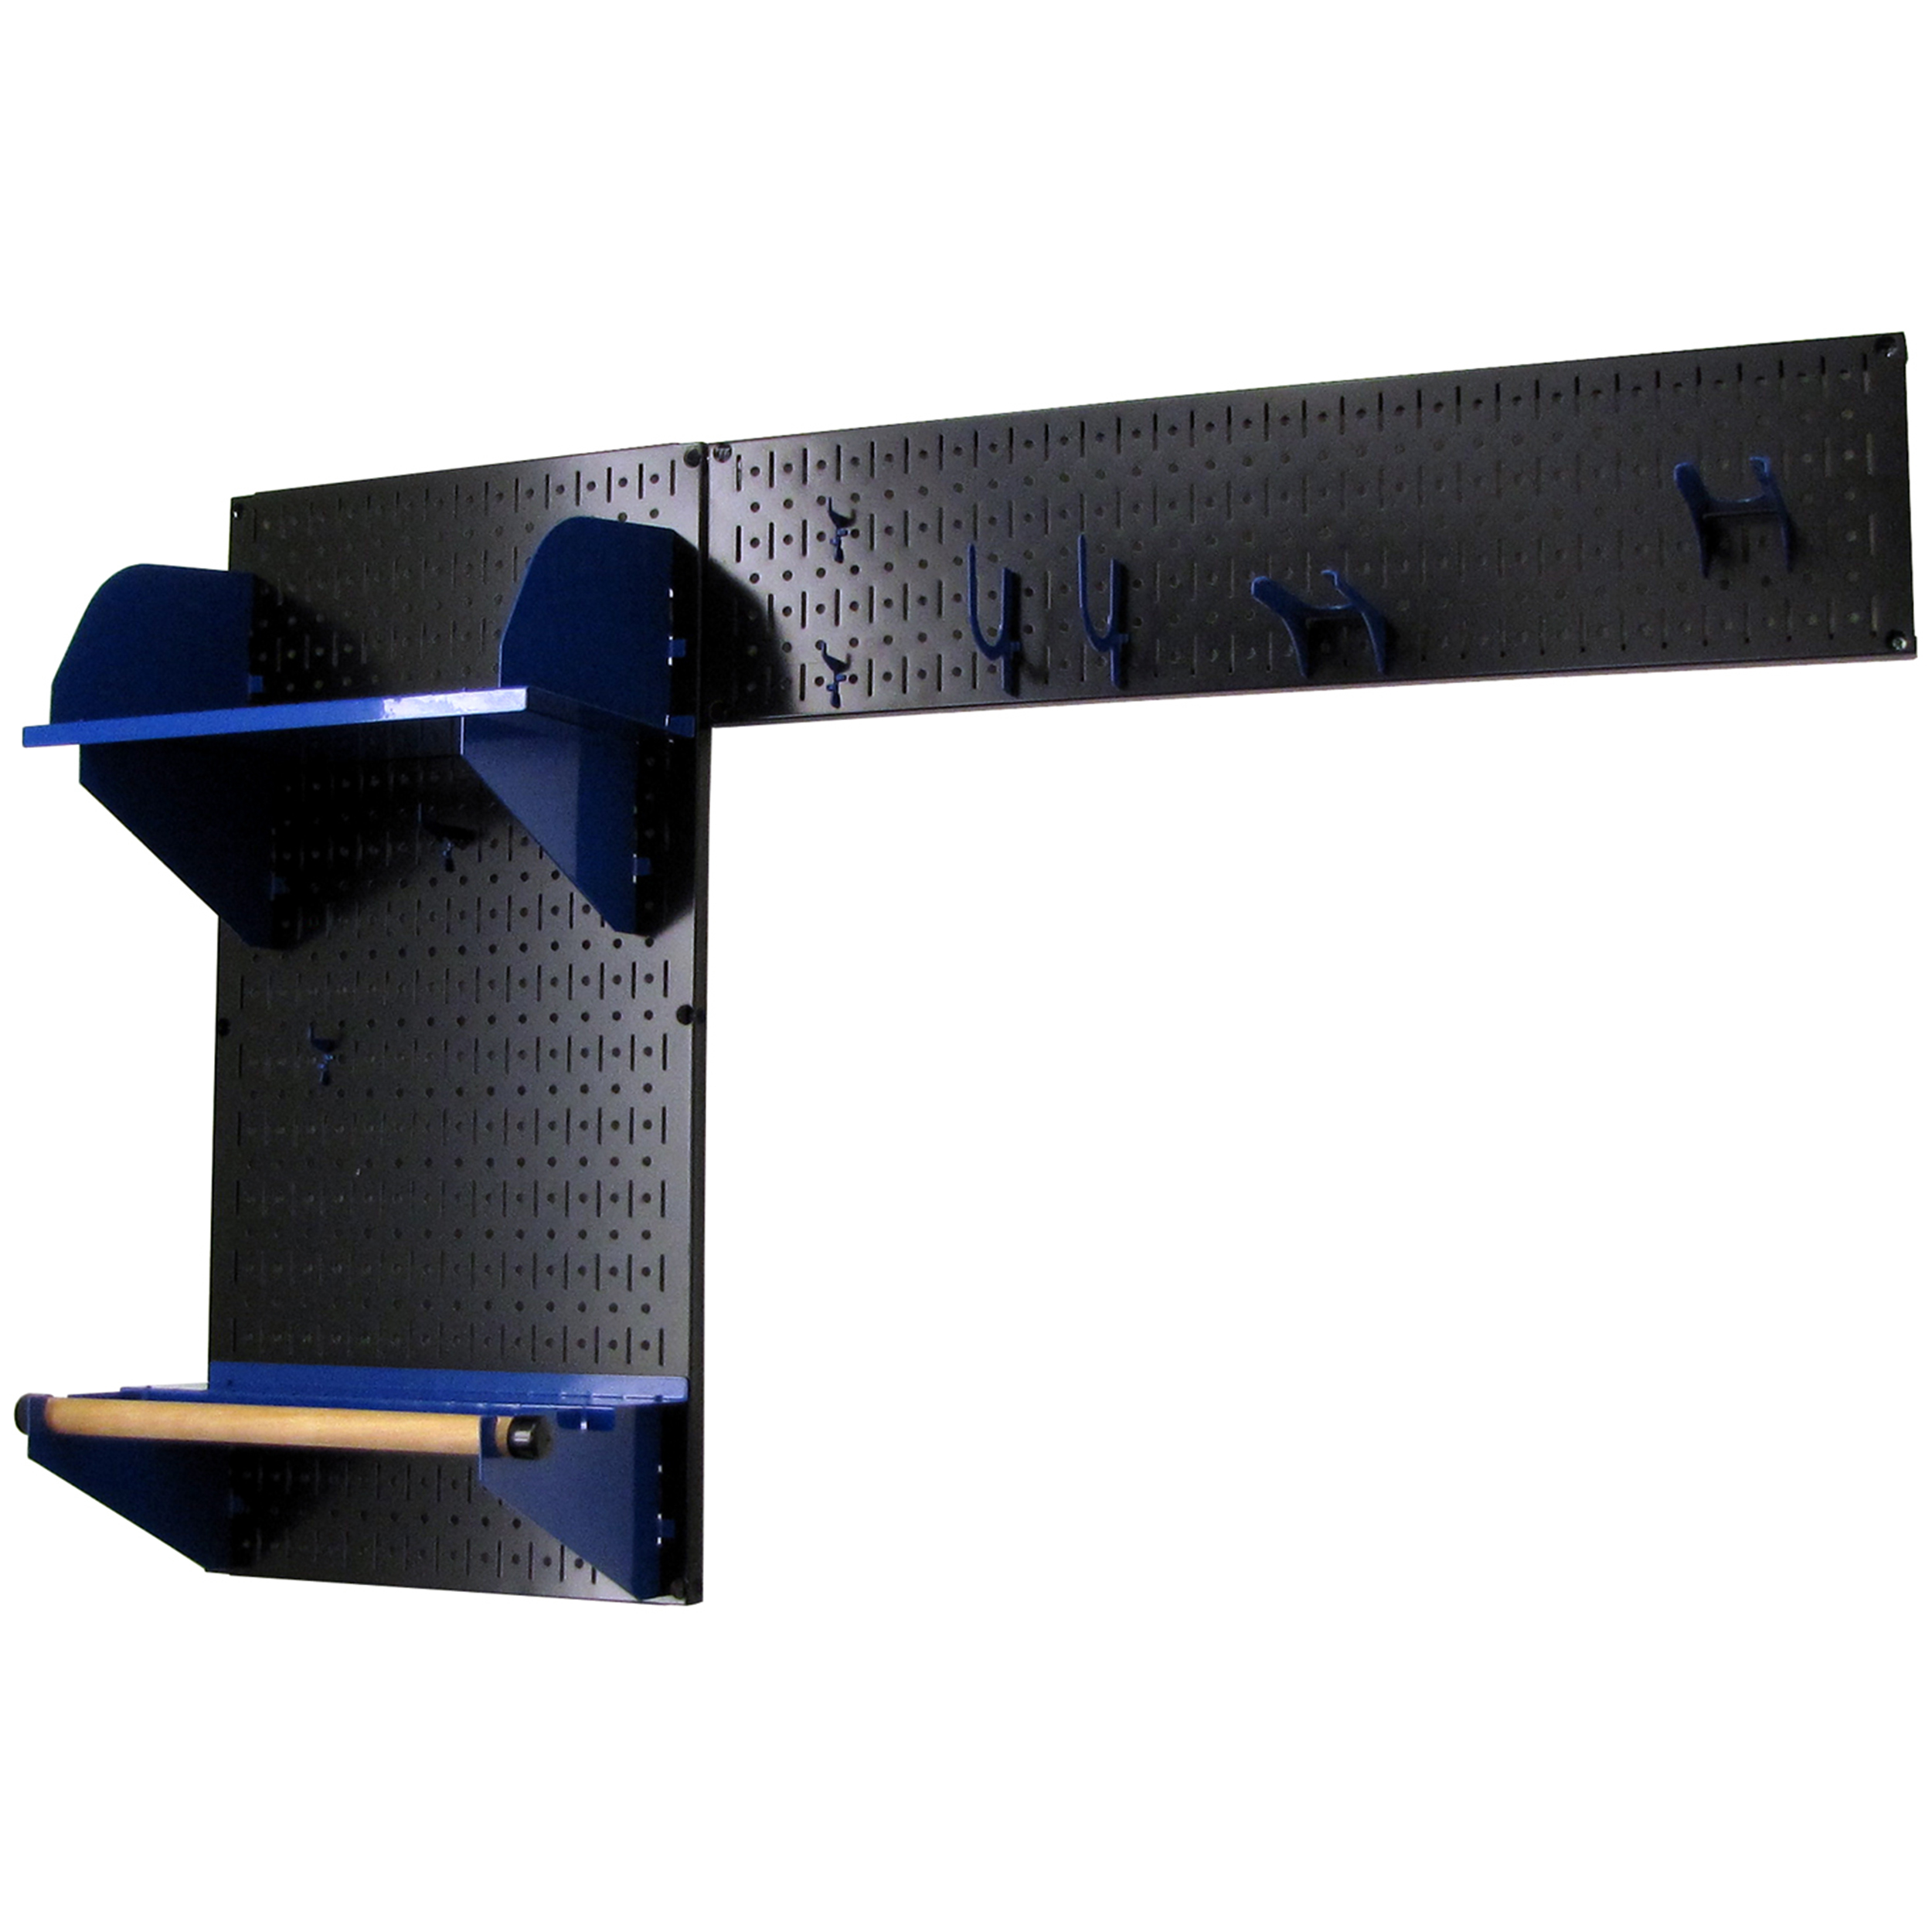 Pegboard Garden Tool Board Organizer With Black Pegboard And Blue Accessories